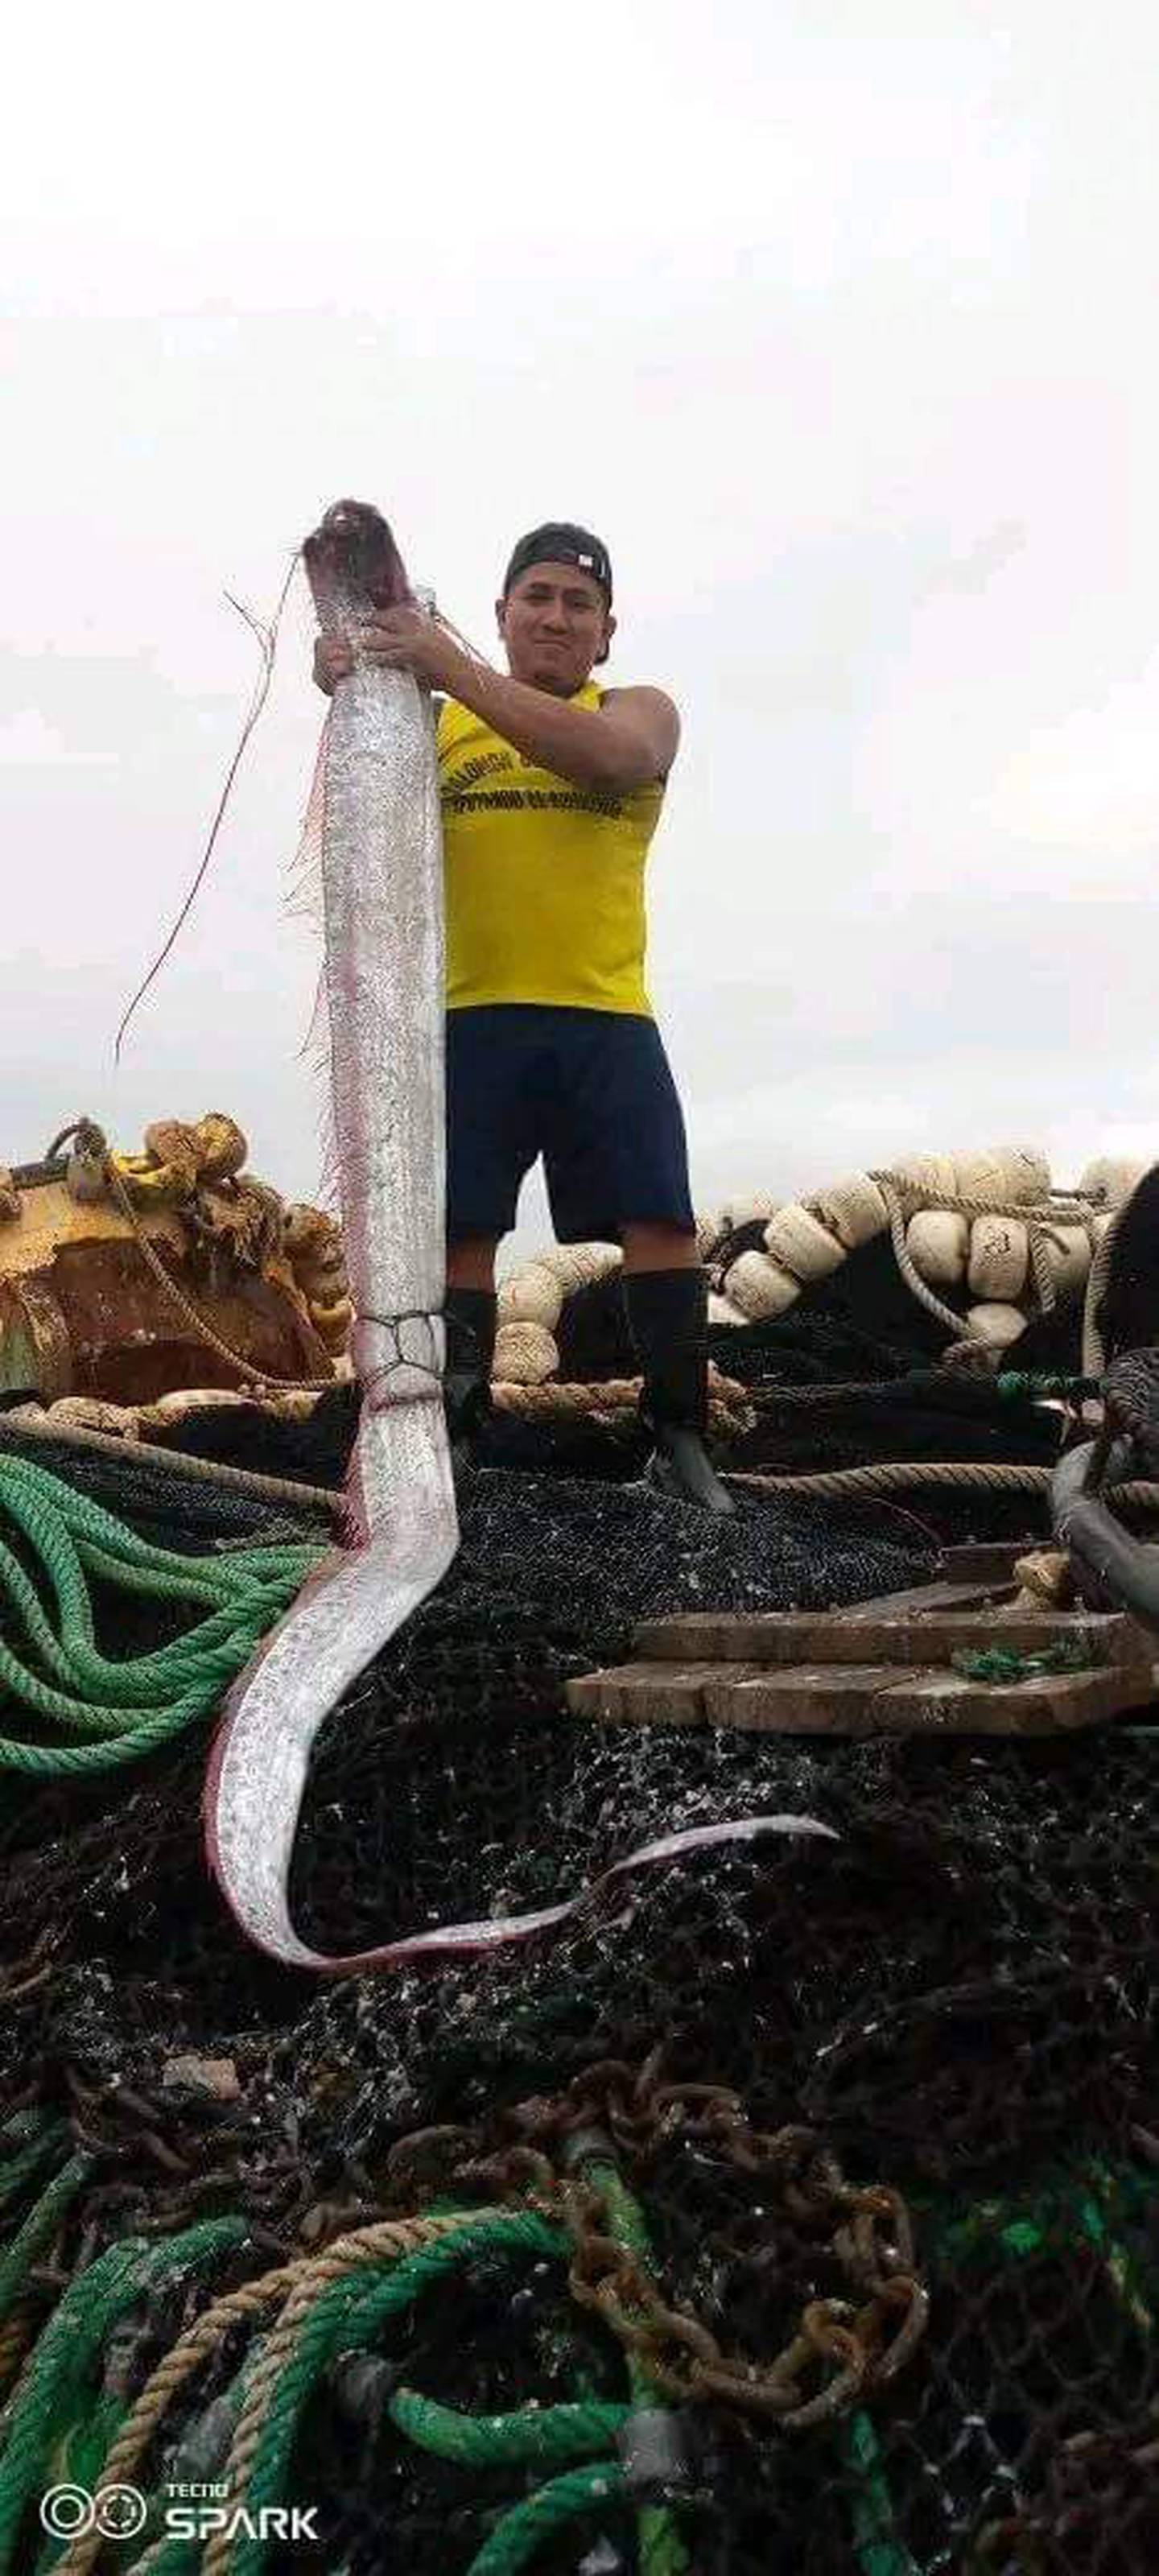 In Santa Elena, they caught a fish by oar.